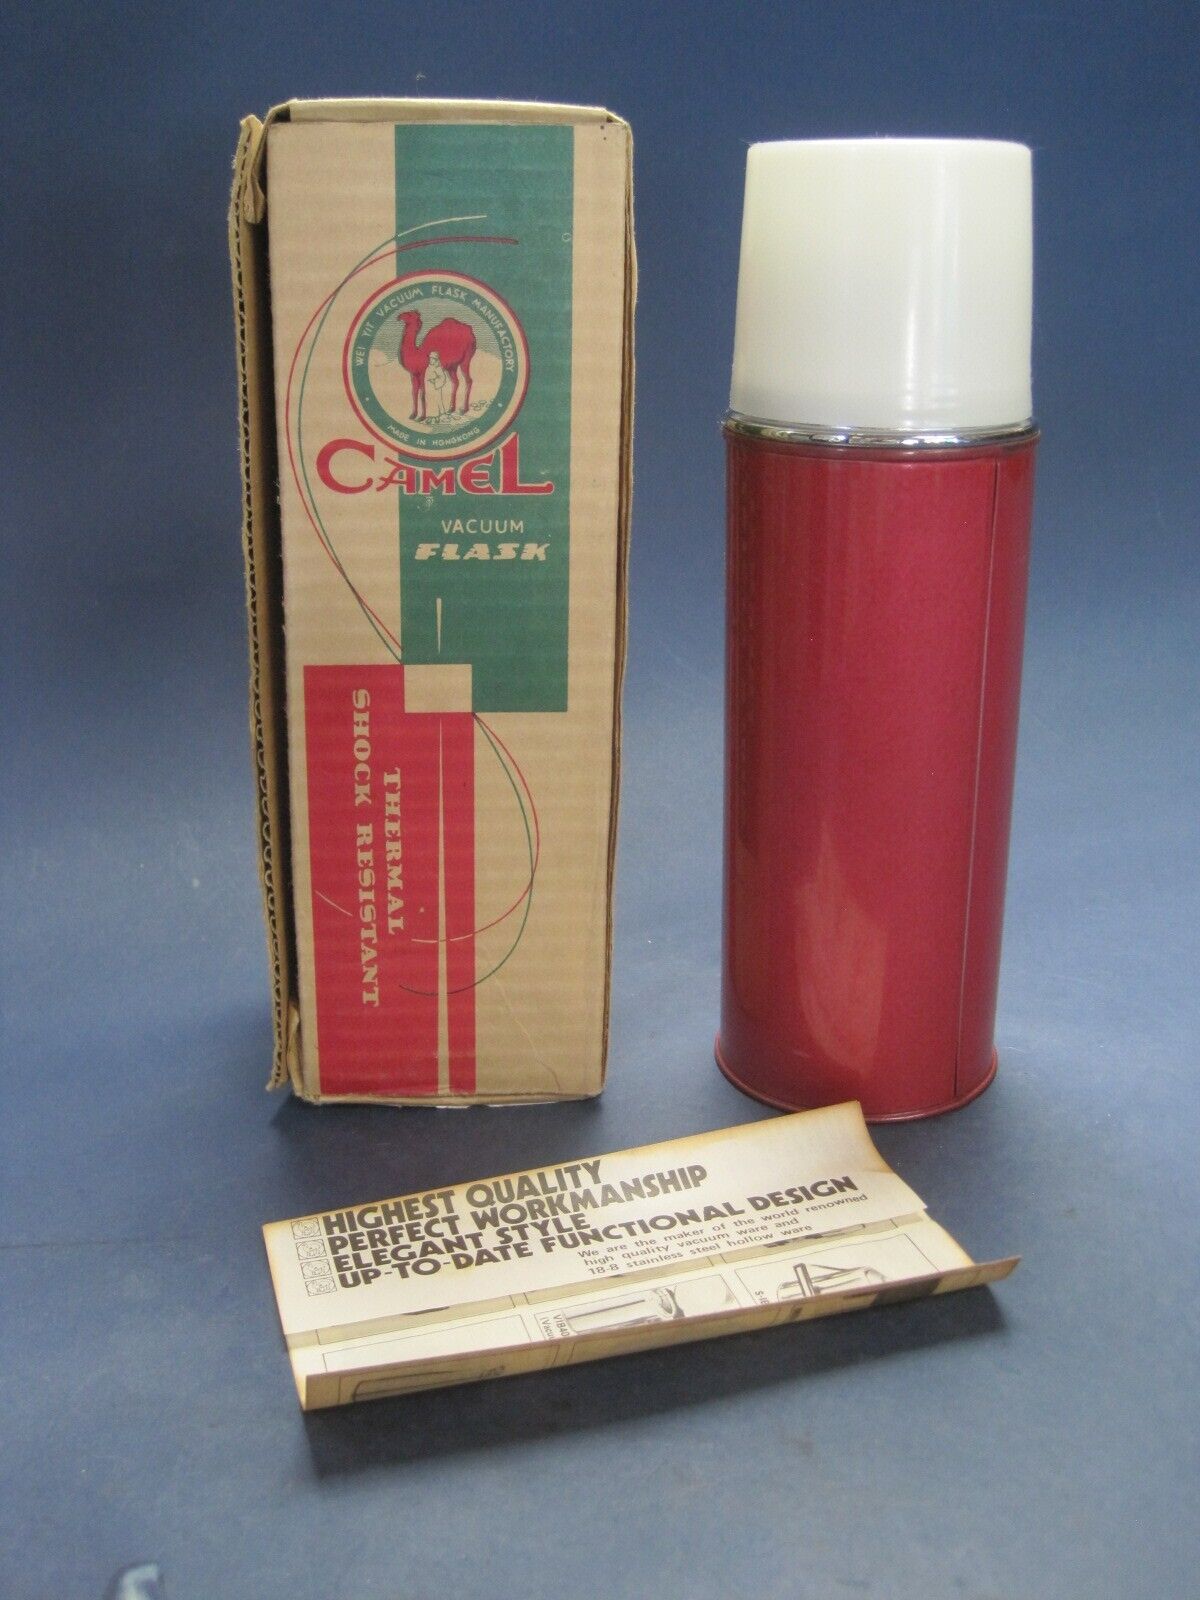 VINT NOS CAMEL Thermal Shock Resistant Vacuum Flask w Box & Papers XLT Condition